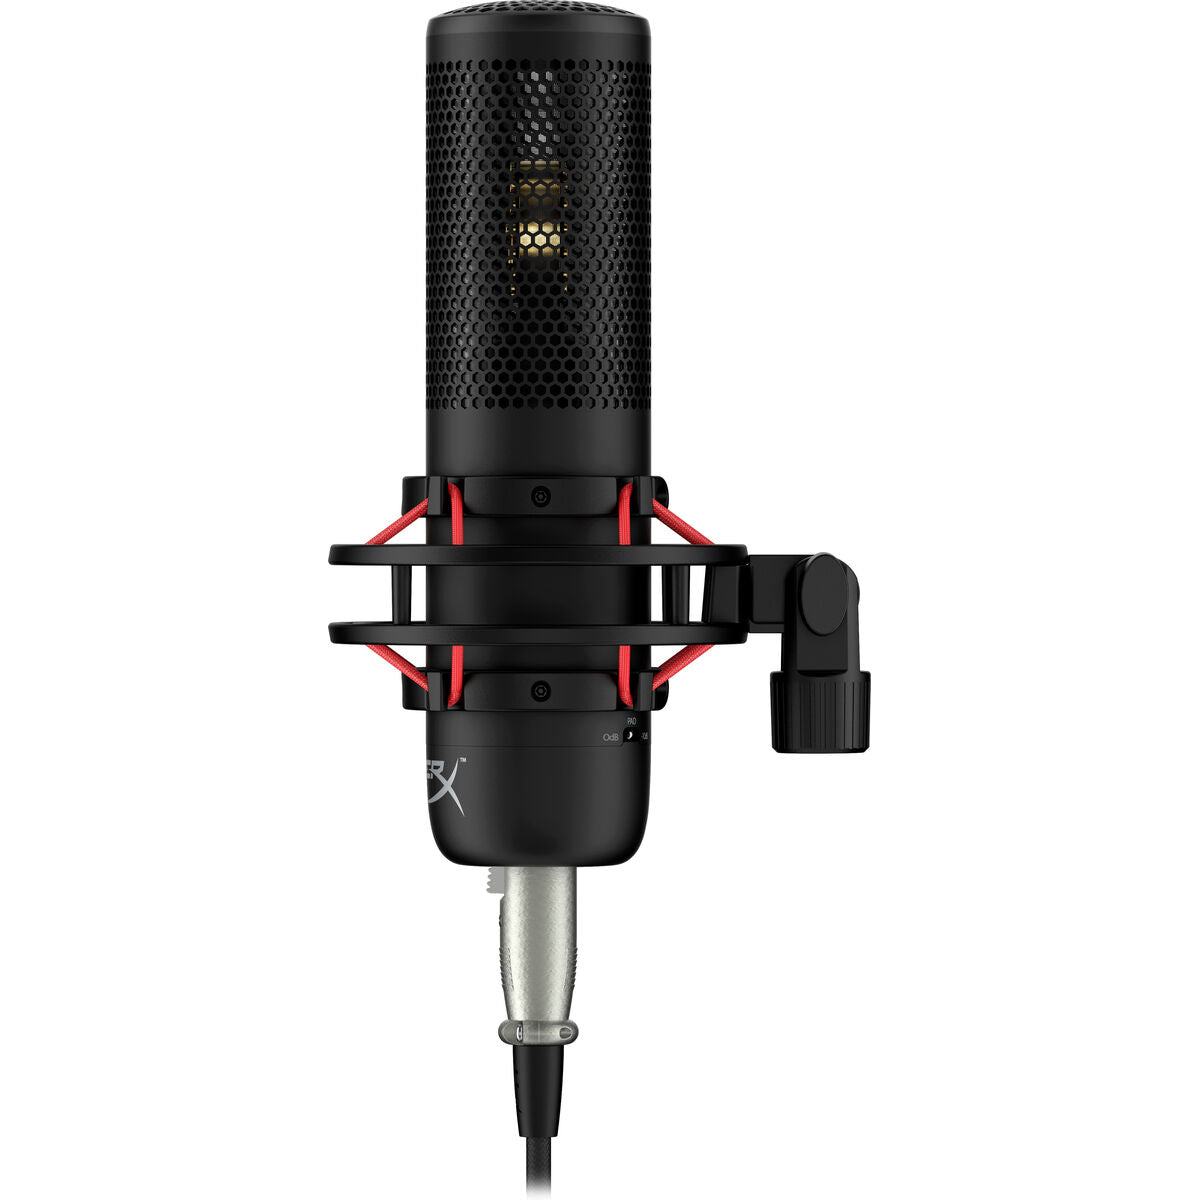 Microphone Hyperx ProCast Microphone, Hyperx, Computing, Accessories, microphone-hyperx-procast-microphone, :Microphone, Brand_Hyperx, category-reference-2609, category-reference-2642, category-reference-2847, category-reference-t-19685, category-reference-t-19908, category-reference-t-21340, computers / peripherals, Condition_NEW, entertainment, gadget, music, office, Price_300 - 400, Teleworking, RiotNook